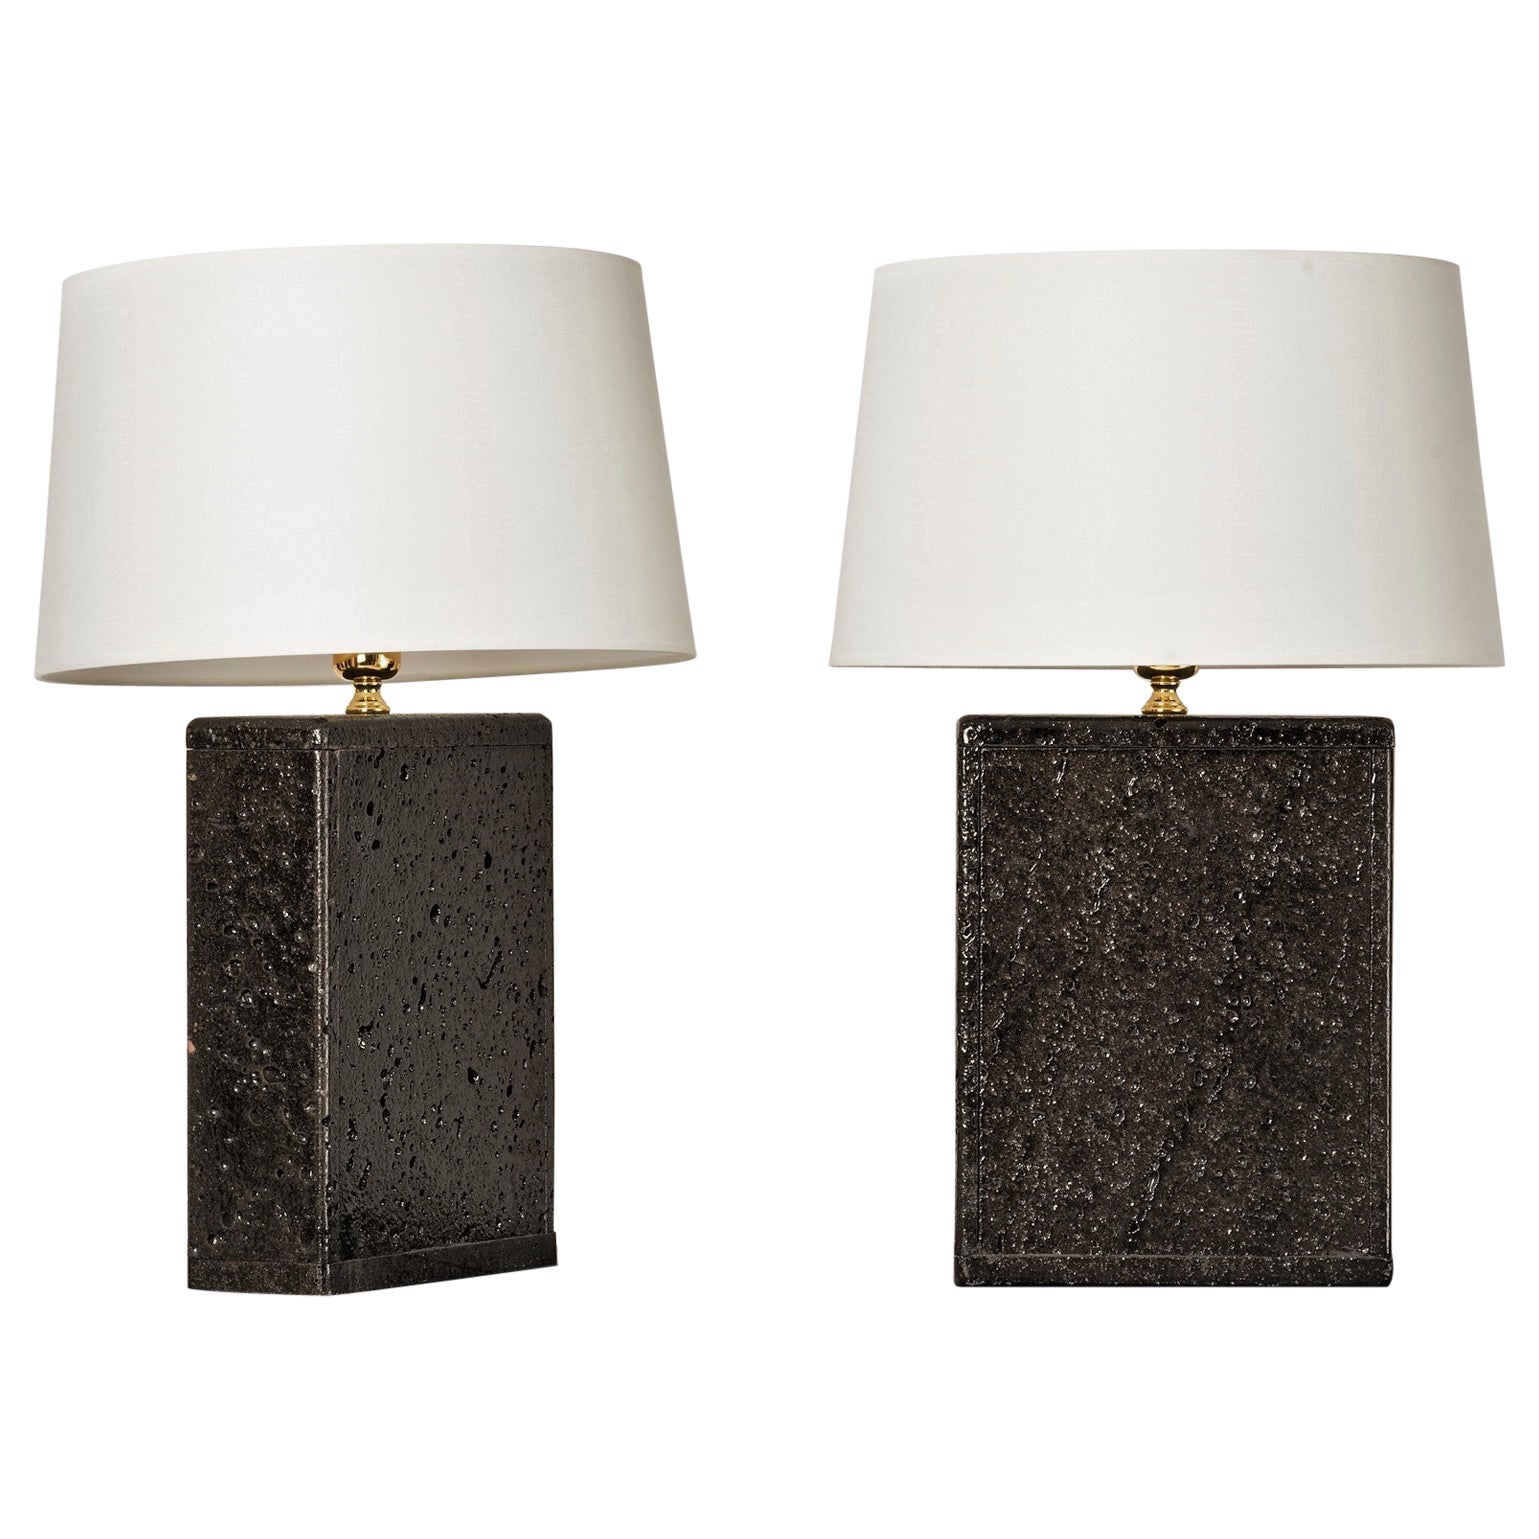 Pair of Deep Black Glazed Lava Stone Table Lamps, France, 1970's